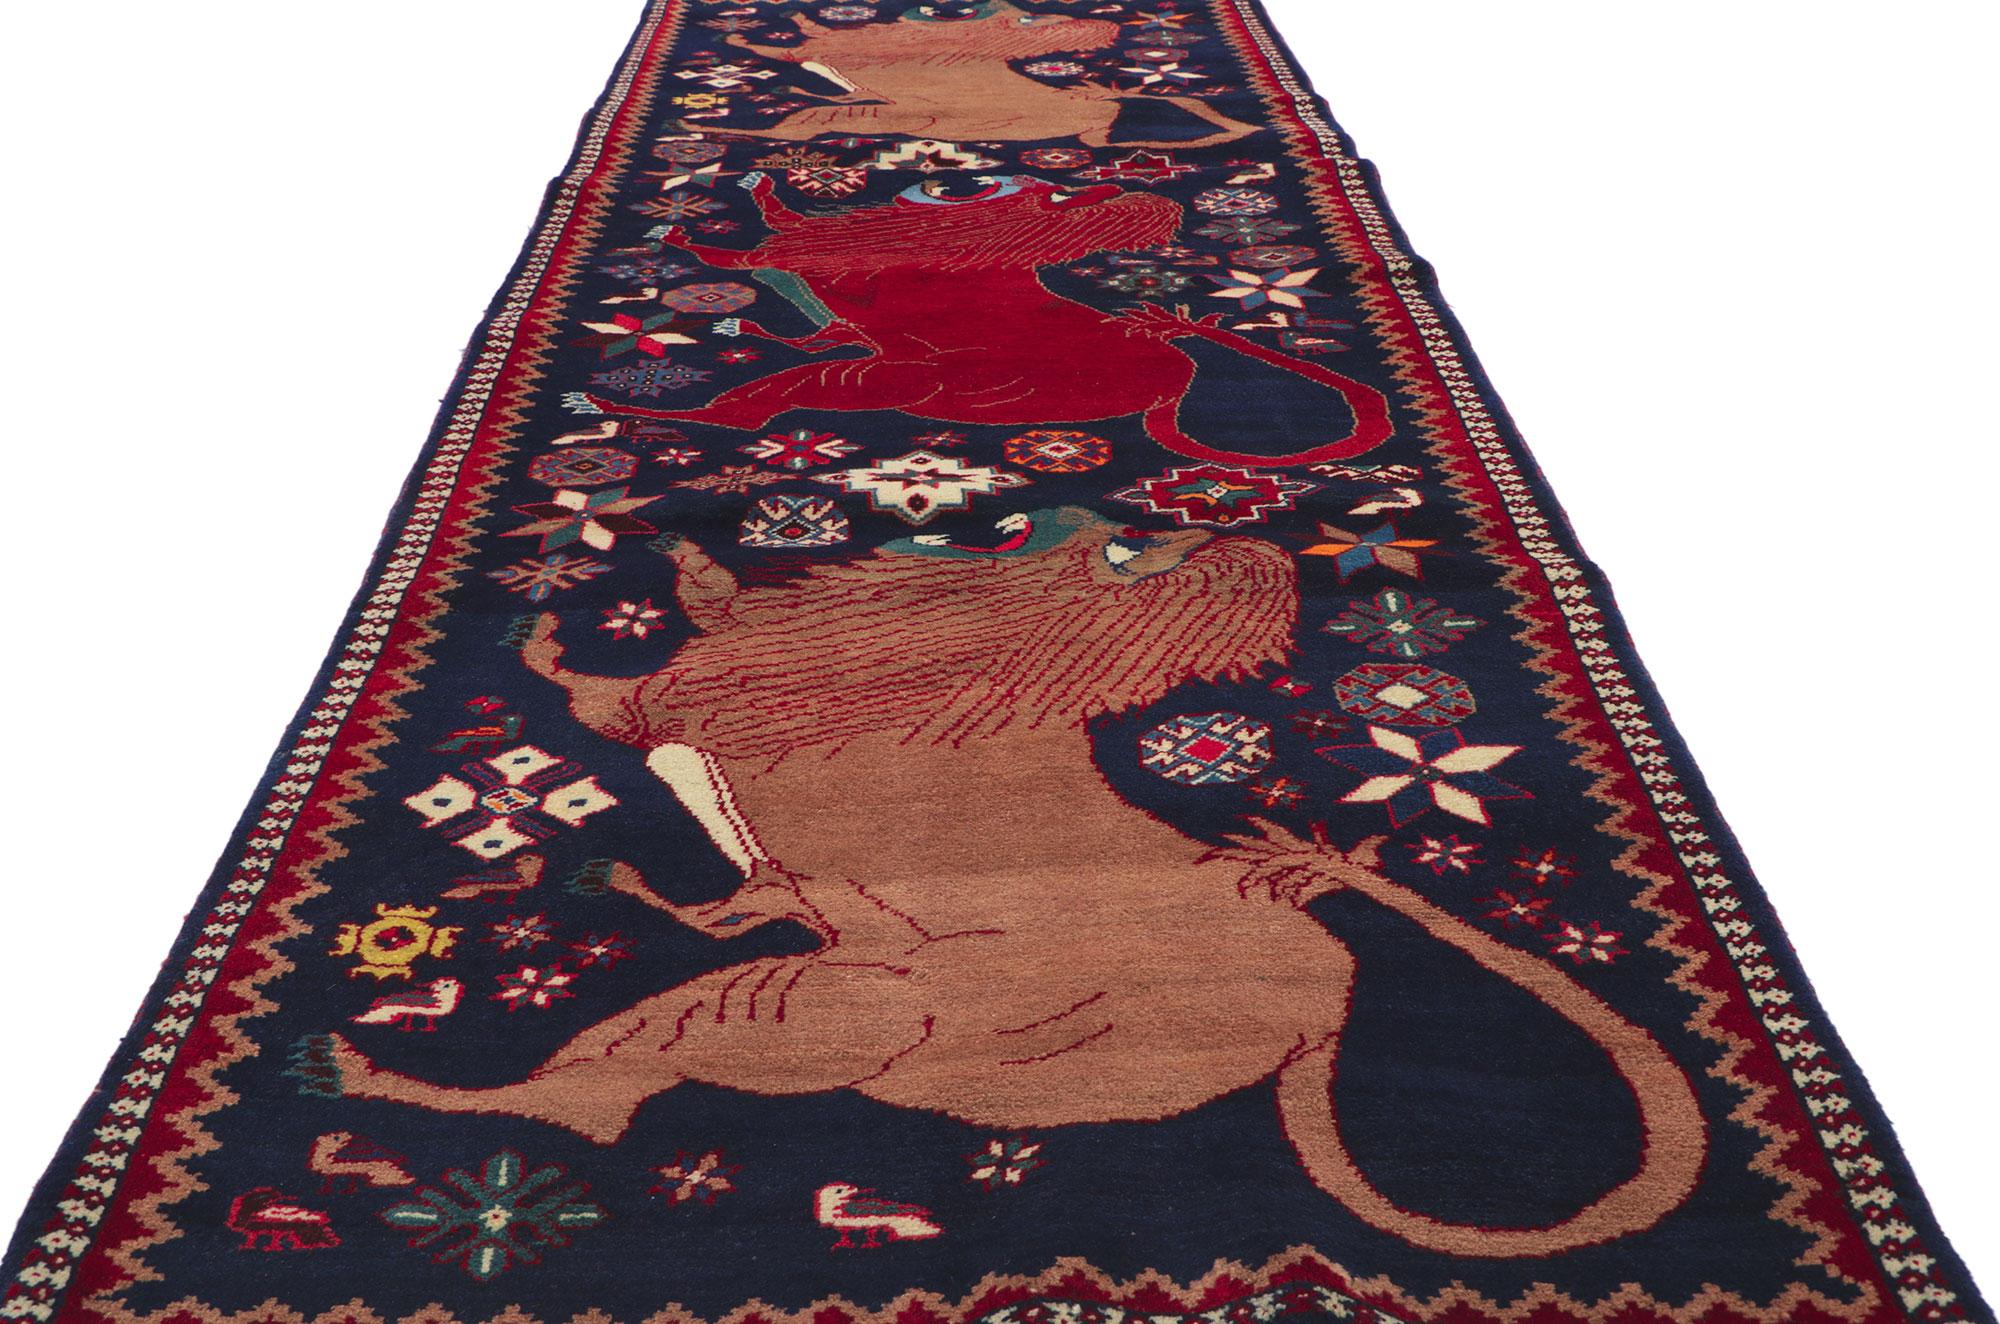 Vintage Persian Qashqai Gabbeh Rug with Zoomorphic Design In Good Condition For Sale In Dallas, TX